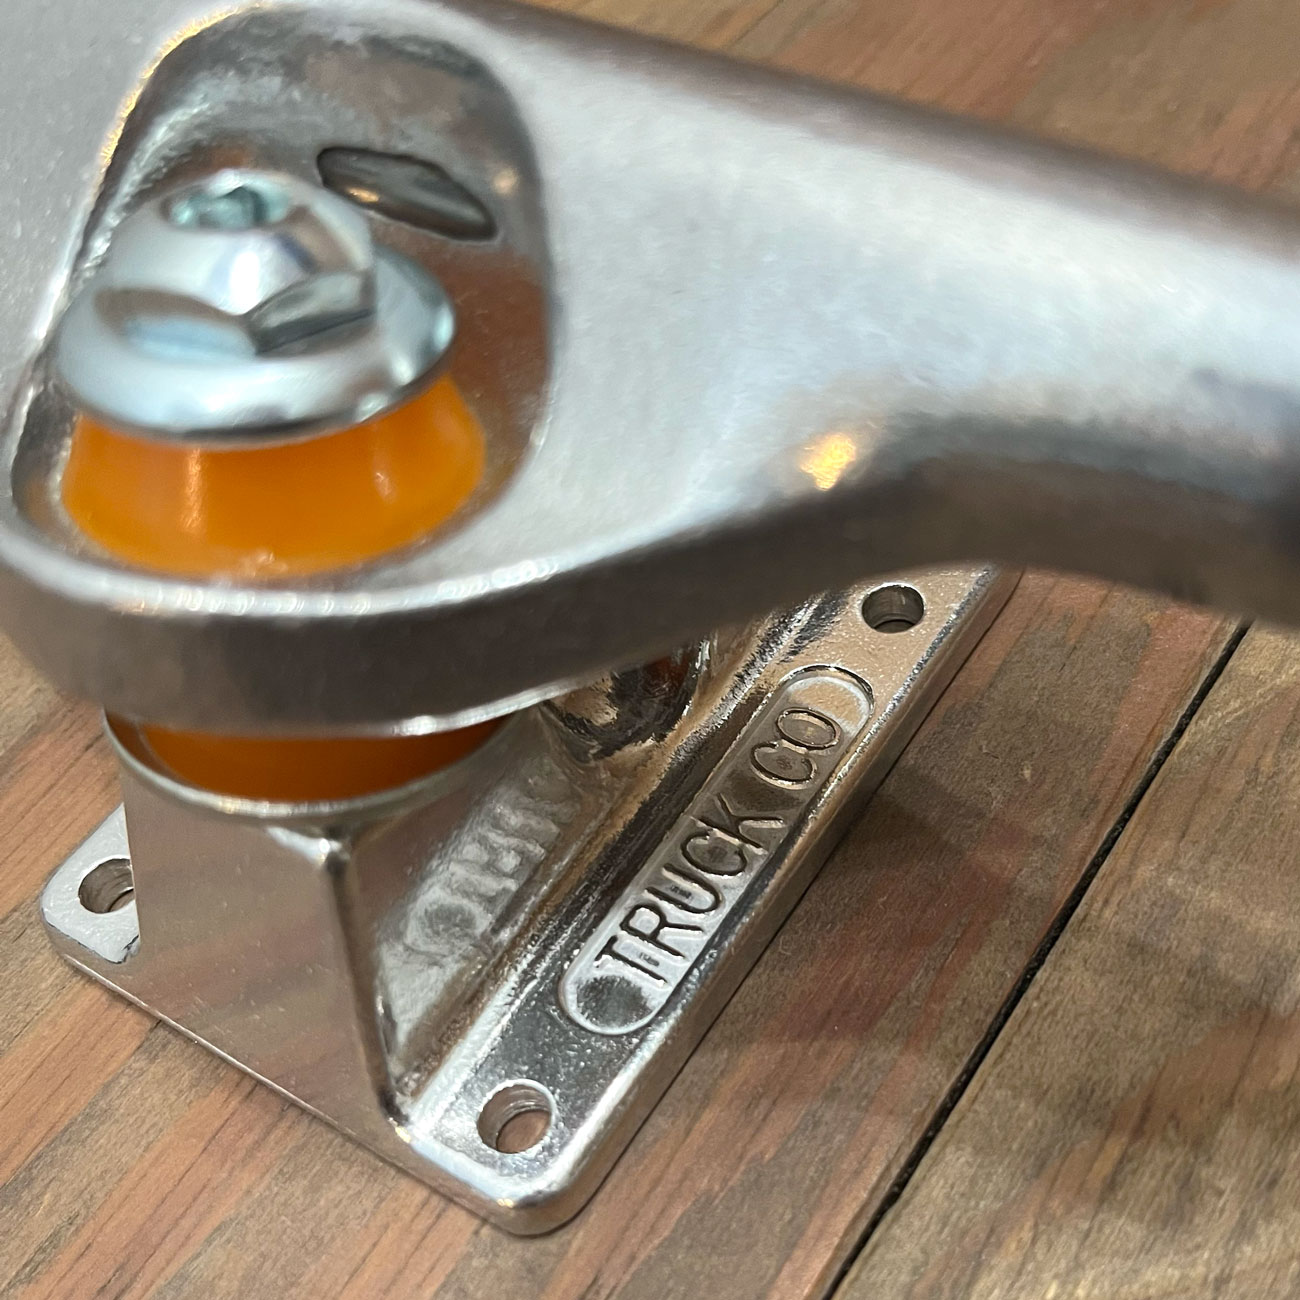 INDEPENDENT STAGE11 FORGED HOLLOW SILVER MID TRUCKS 129